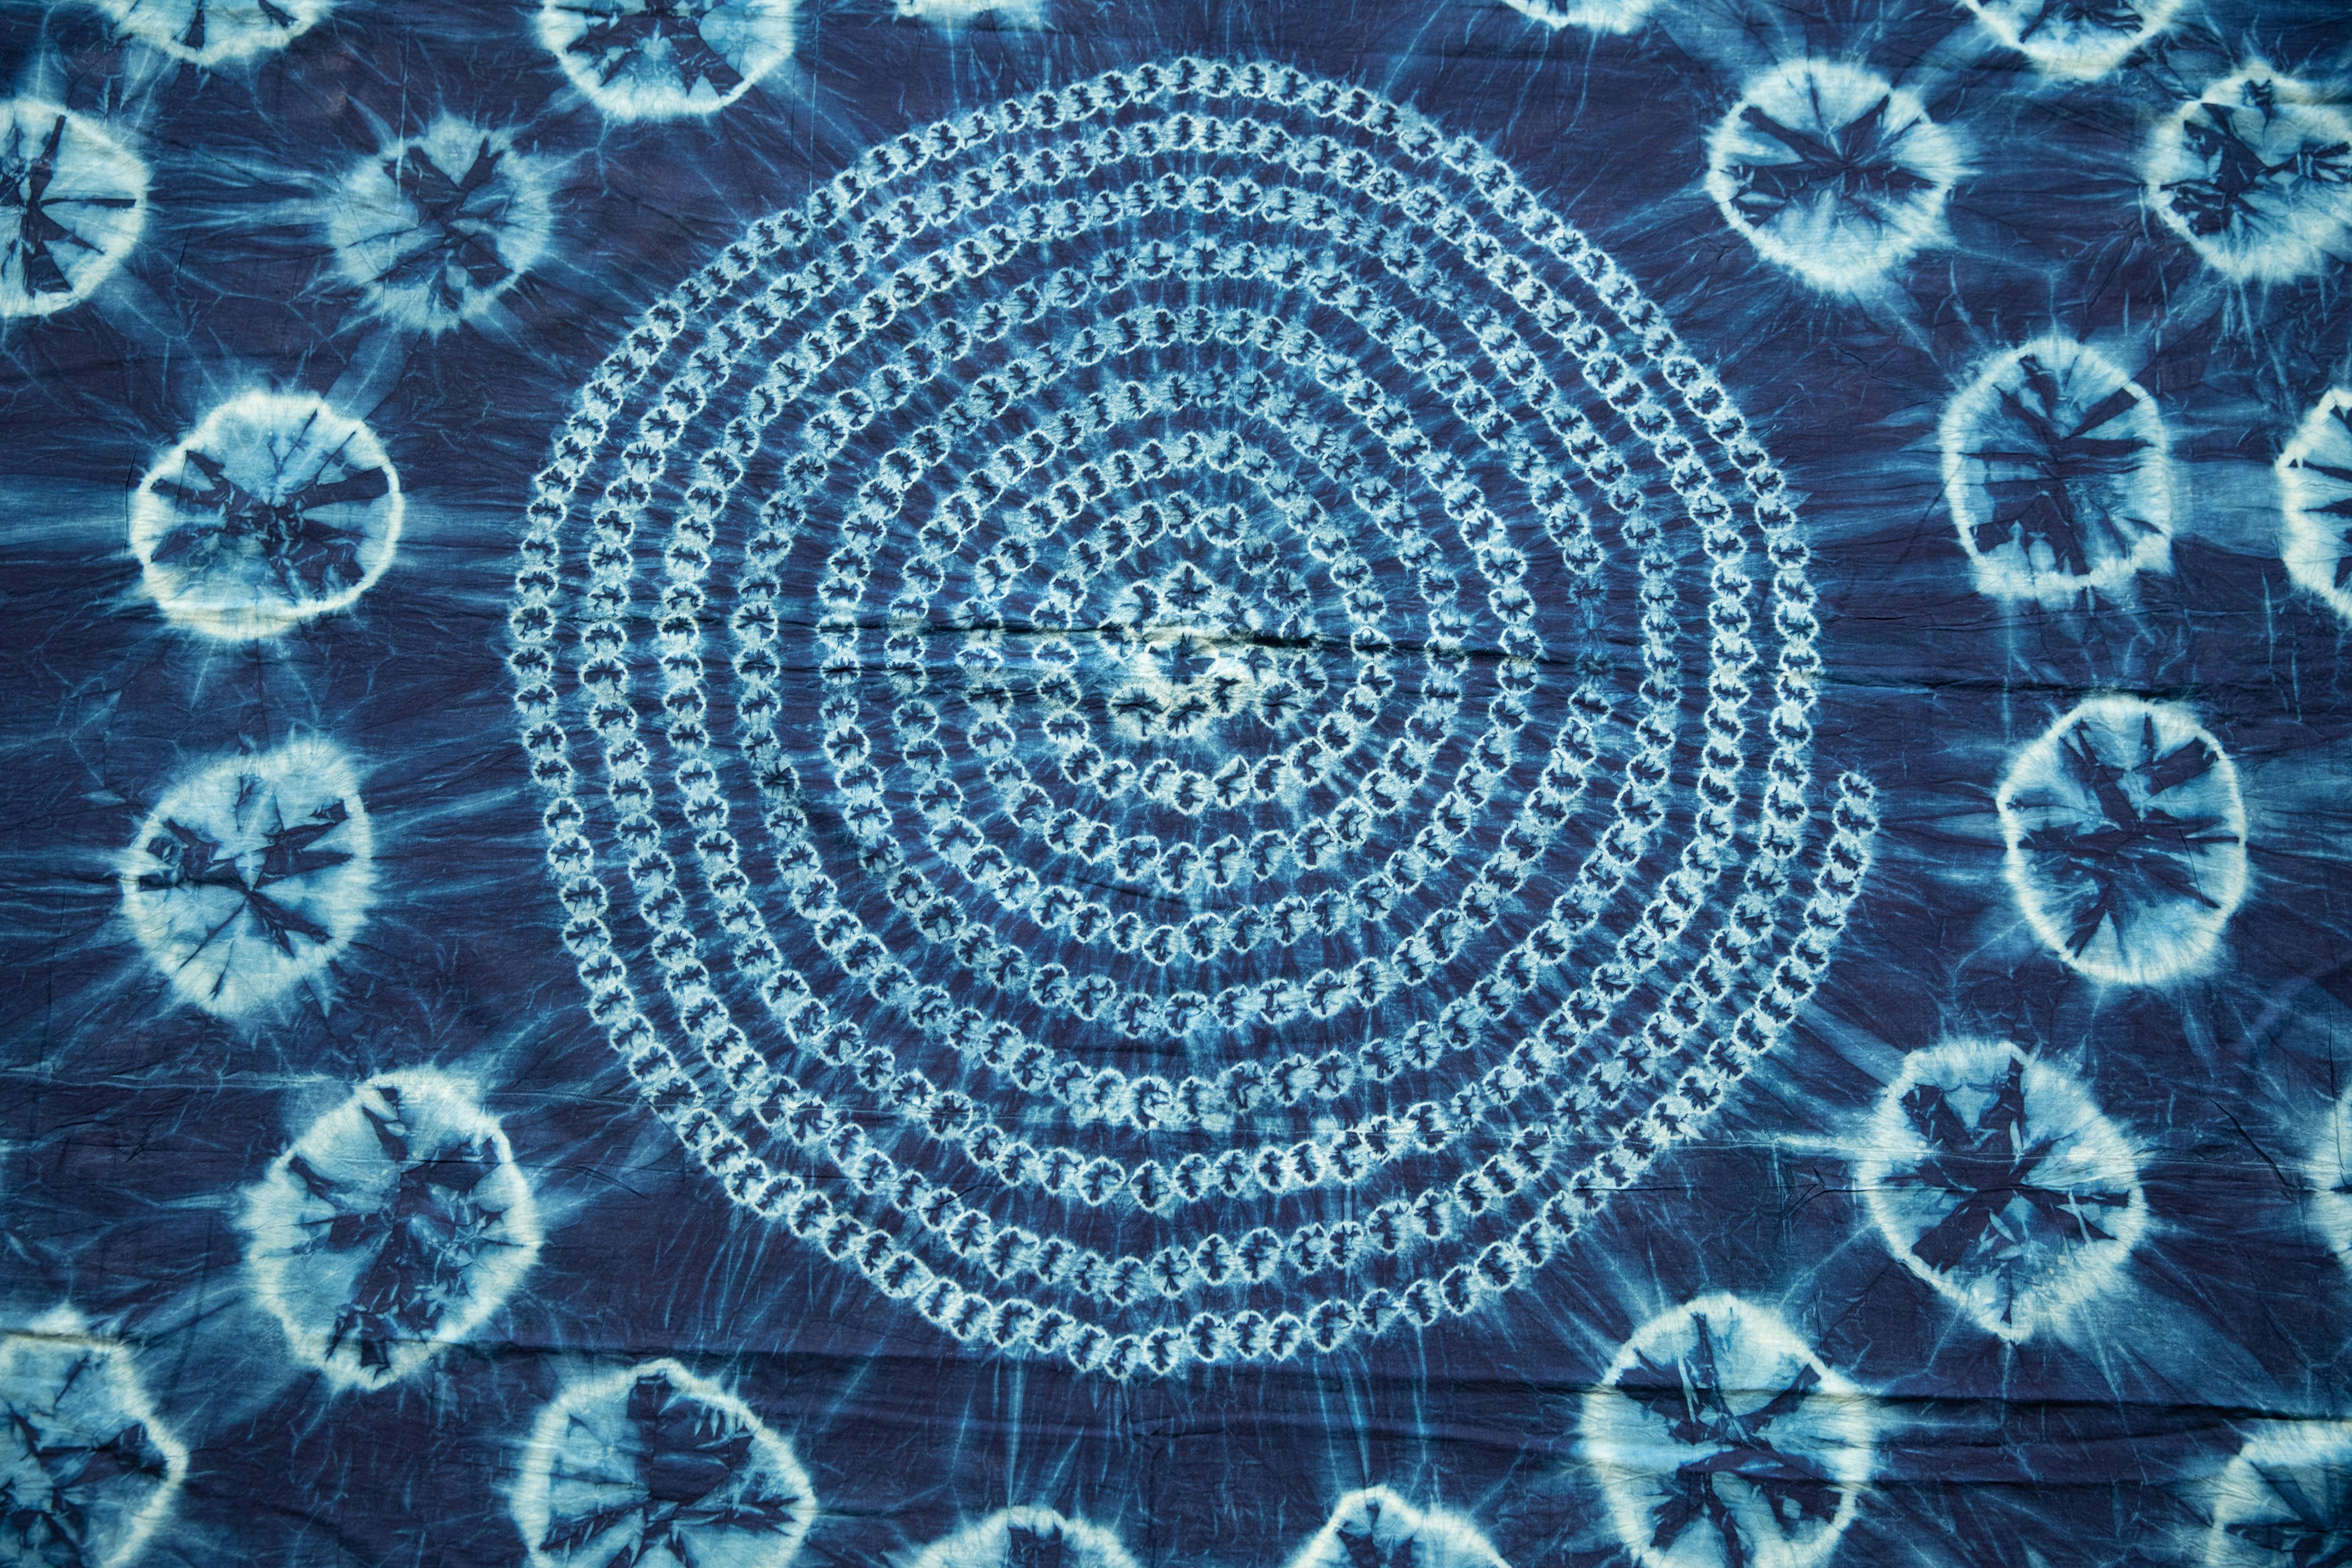 A photograph of an indigo and white tie-dyed textile.